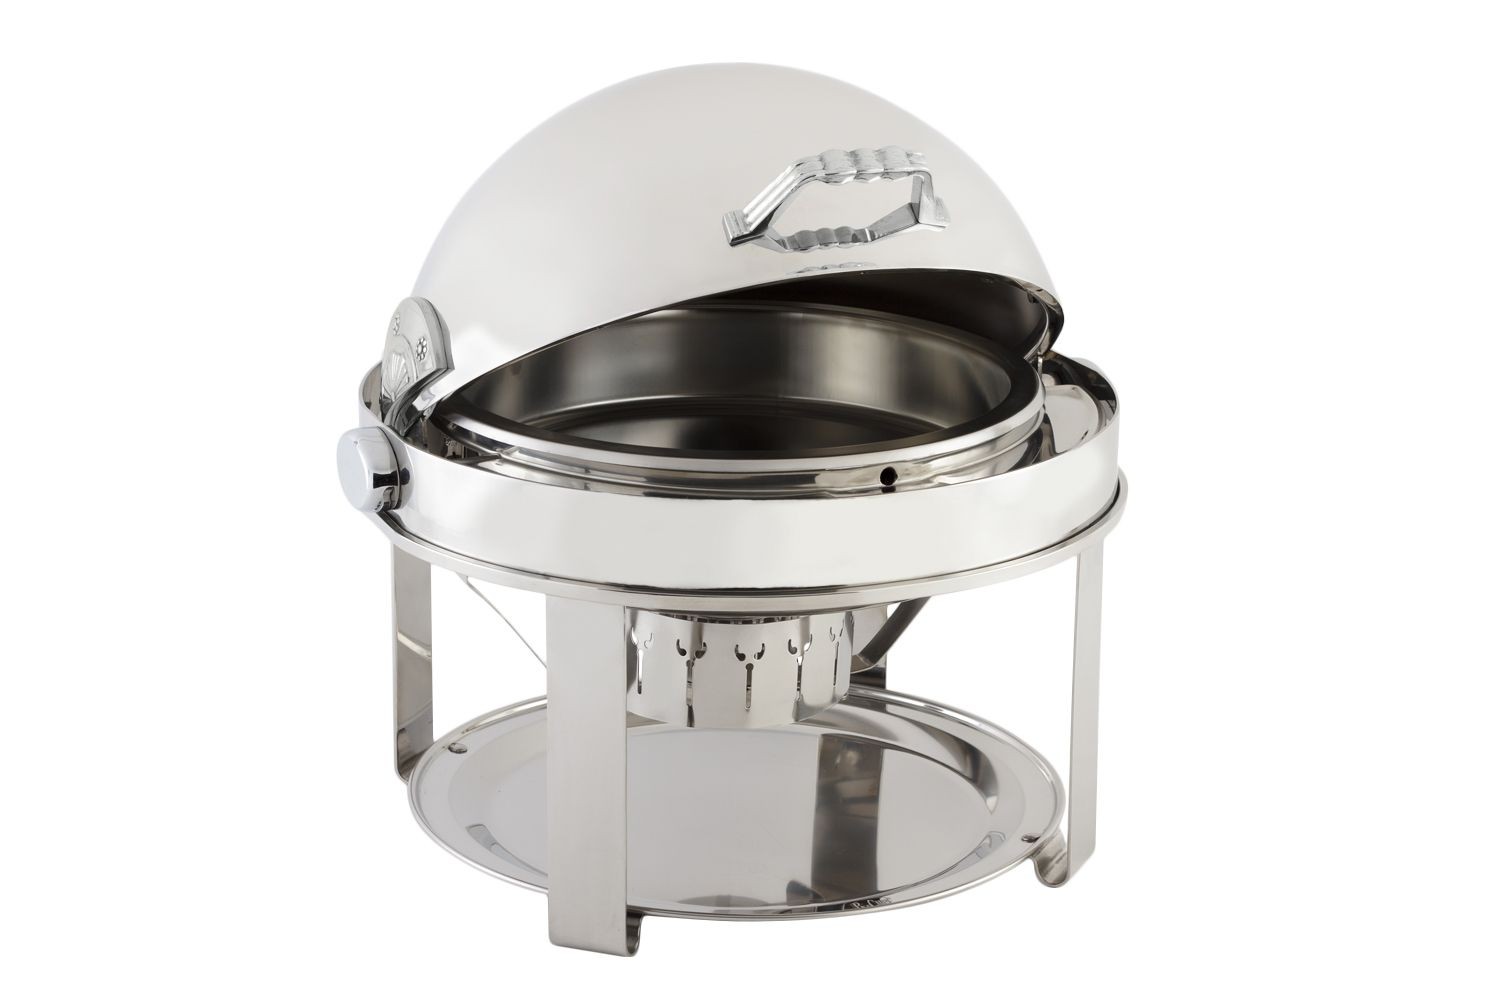 Bon Chef 12010CH Elite Stainless Steel Round Chrome Trim Chafer with Contemporary Legs, 8 Qt.